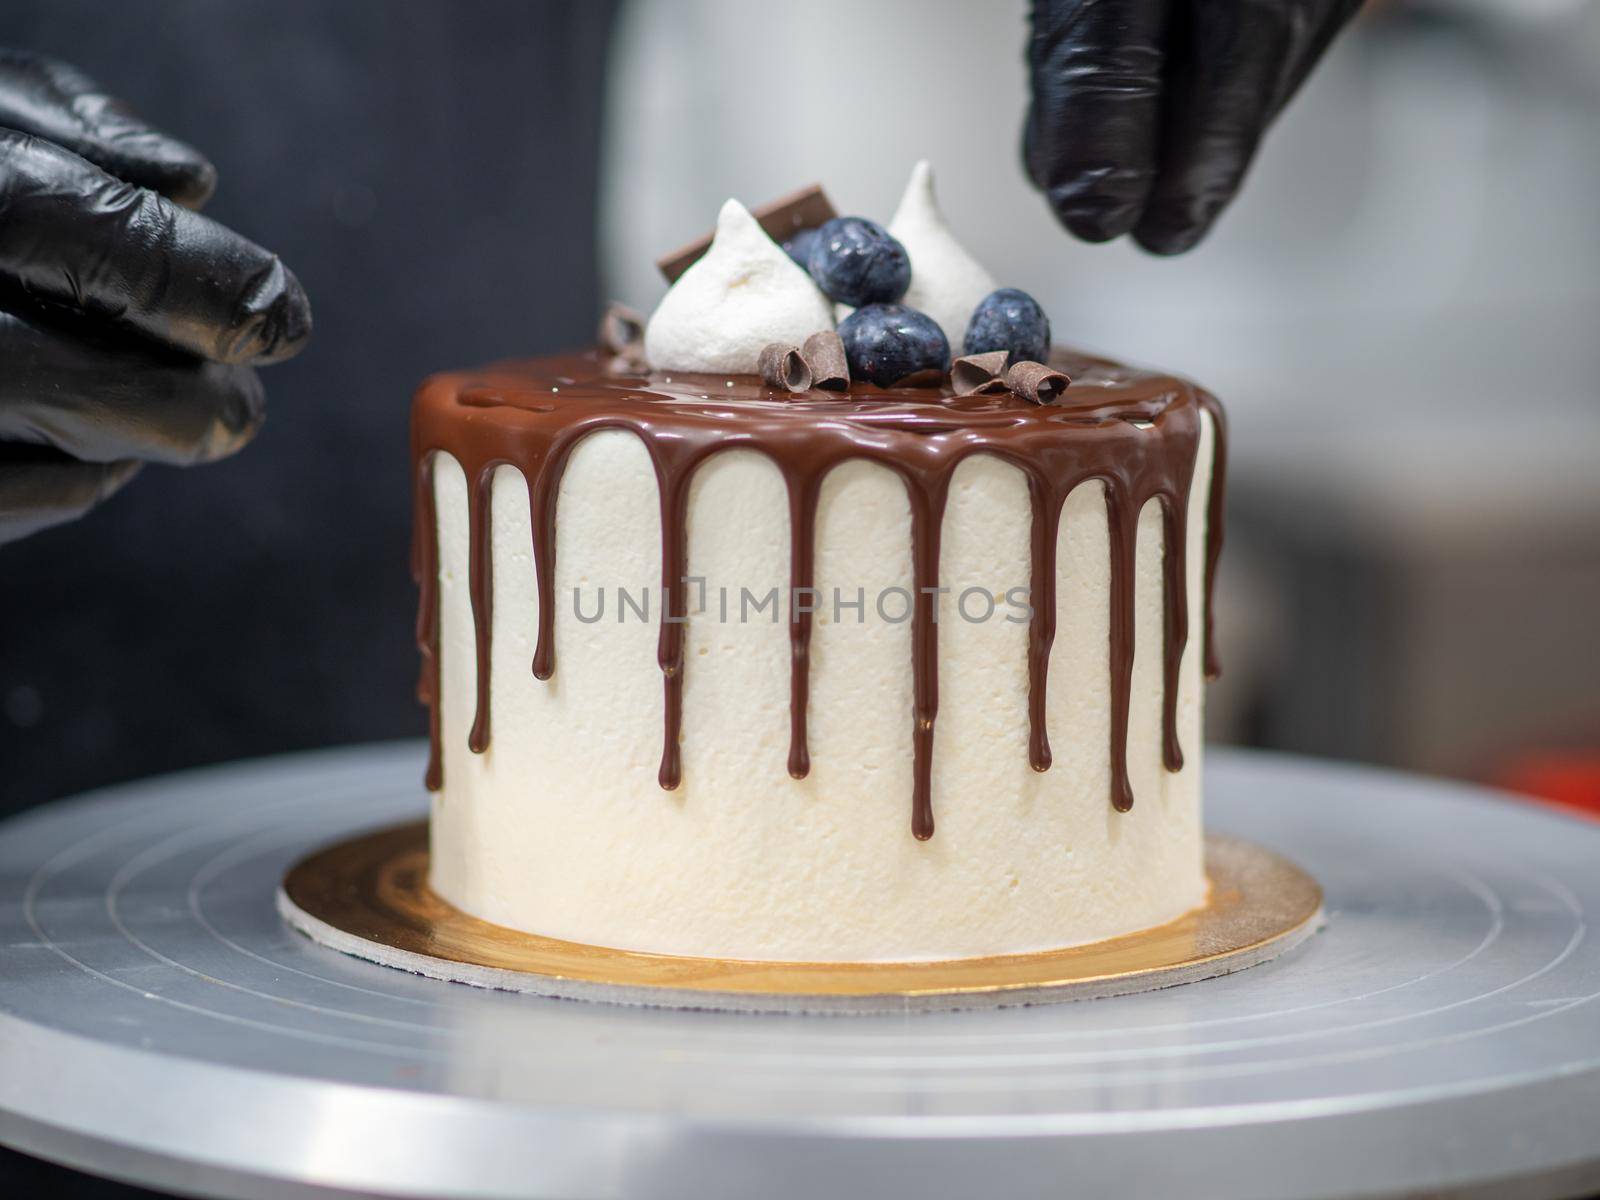 cake designer decorating a chocolate drip cake with mering and blueberries by verbano